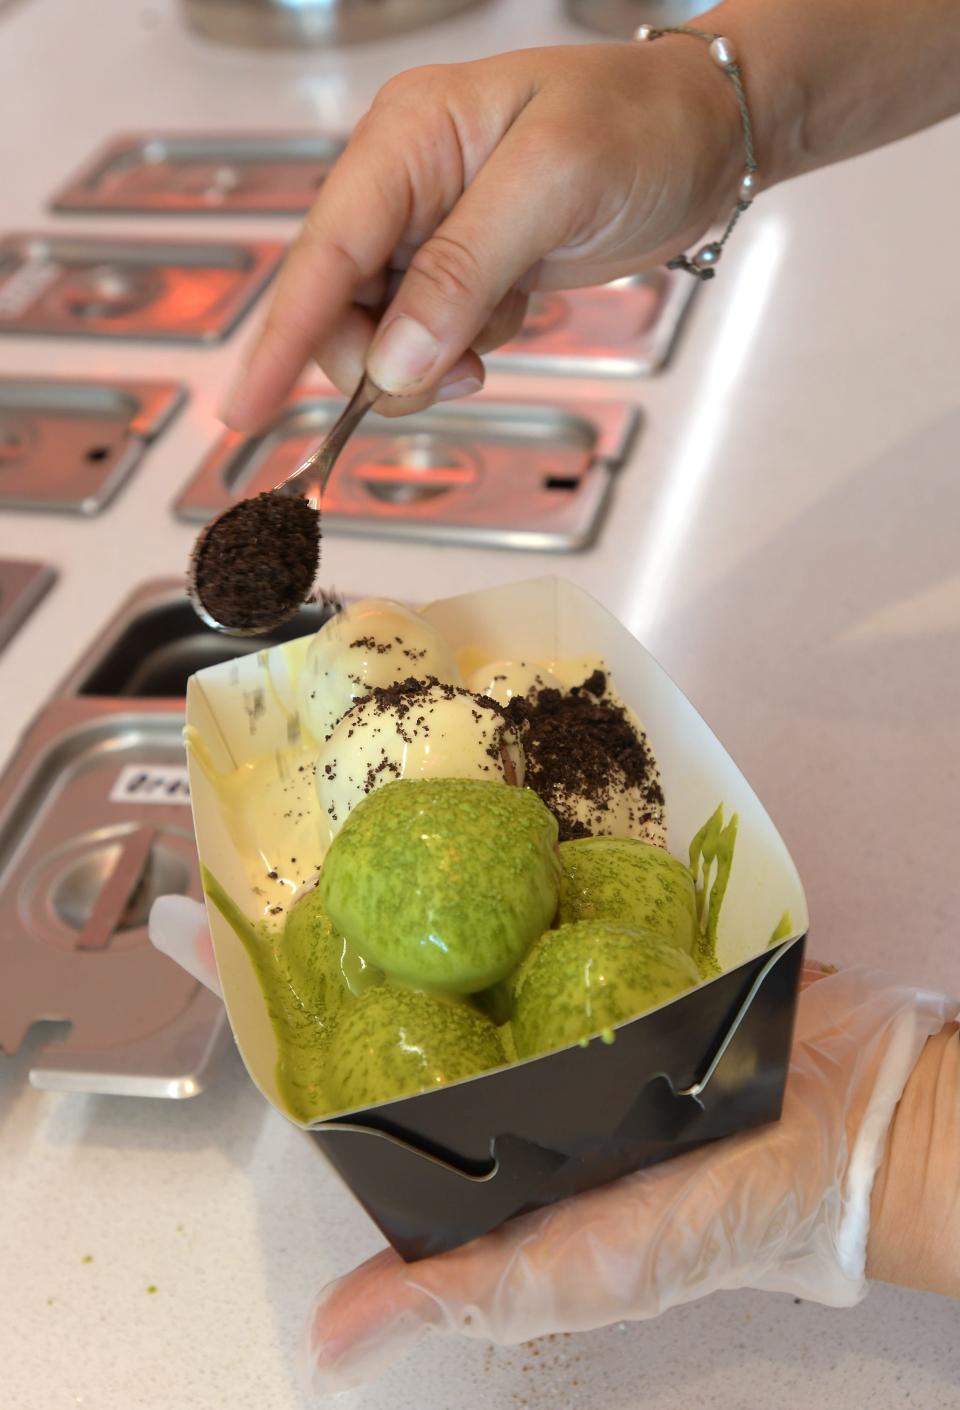 Crushed Oreos are sprinkled on white chocolate Cookies & Cream doughnuts in a mixed box with Love U So Matcha doughnuts drizzled with Matcha infused white chocolate at Lukumades, a new doughnut shop in Jacksonville Beach.